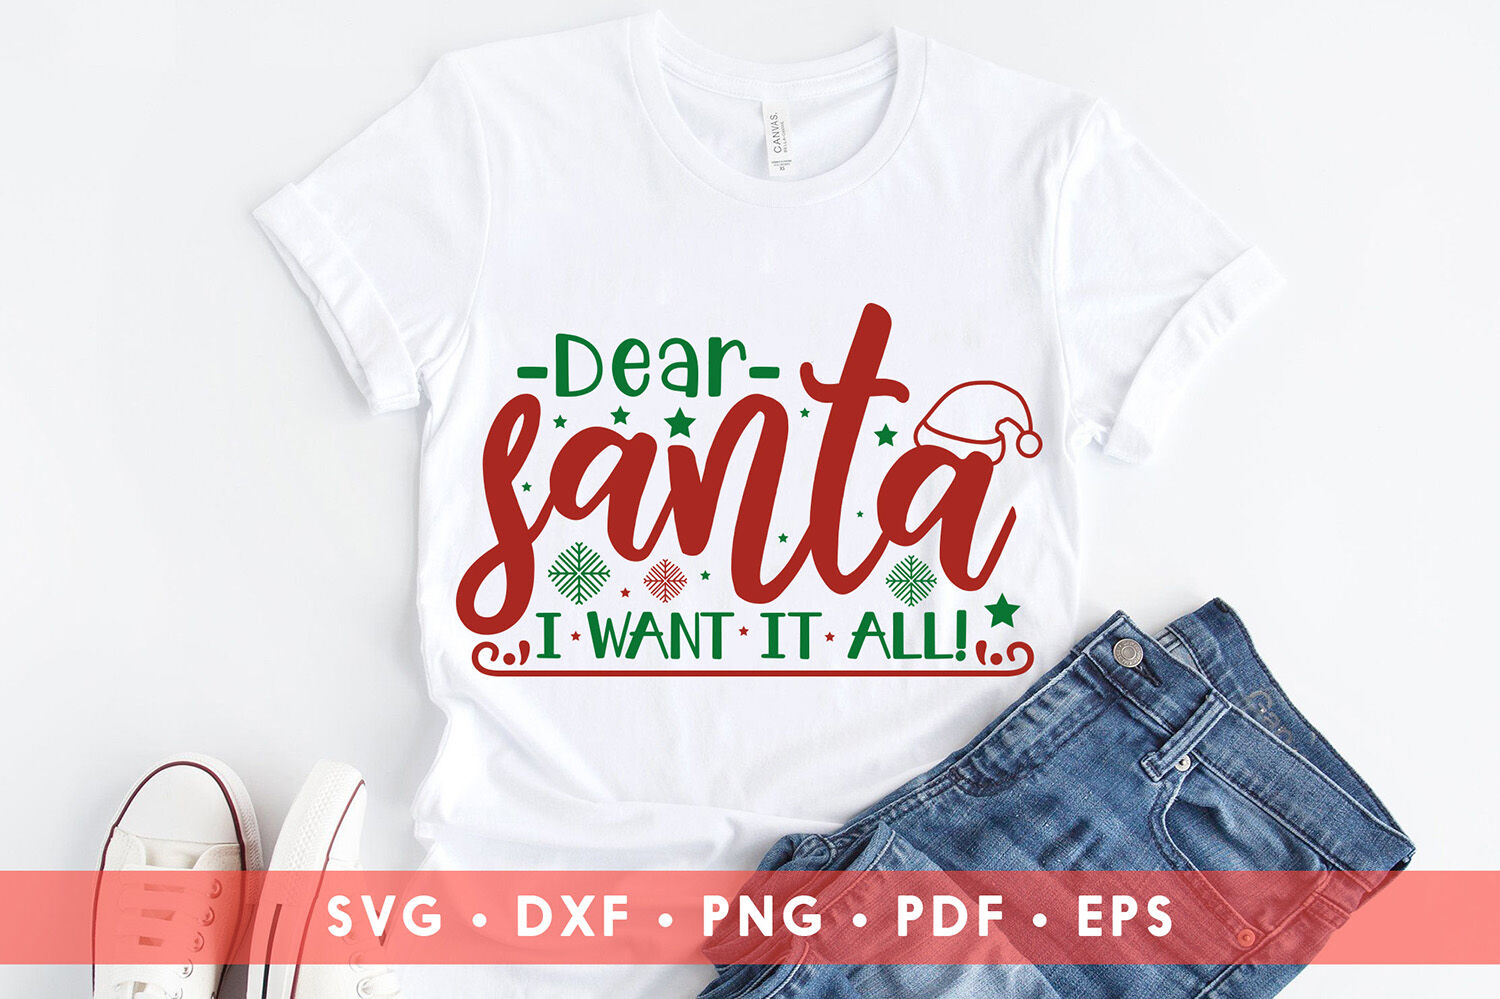 Dear Santa I Want It All Christmas Svg Christmas Quotes By Craftlabsvg Thehungryjpeg Com